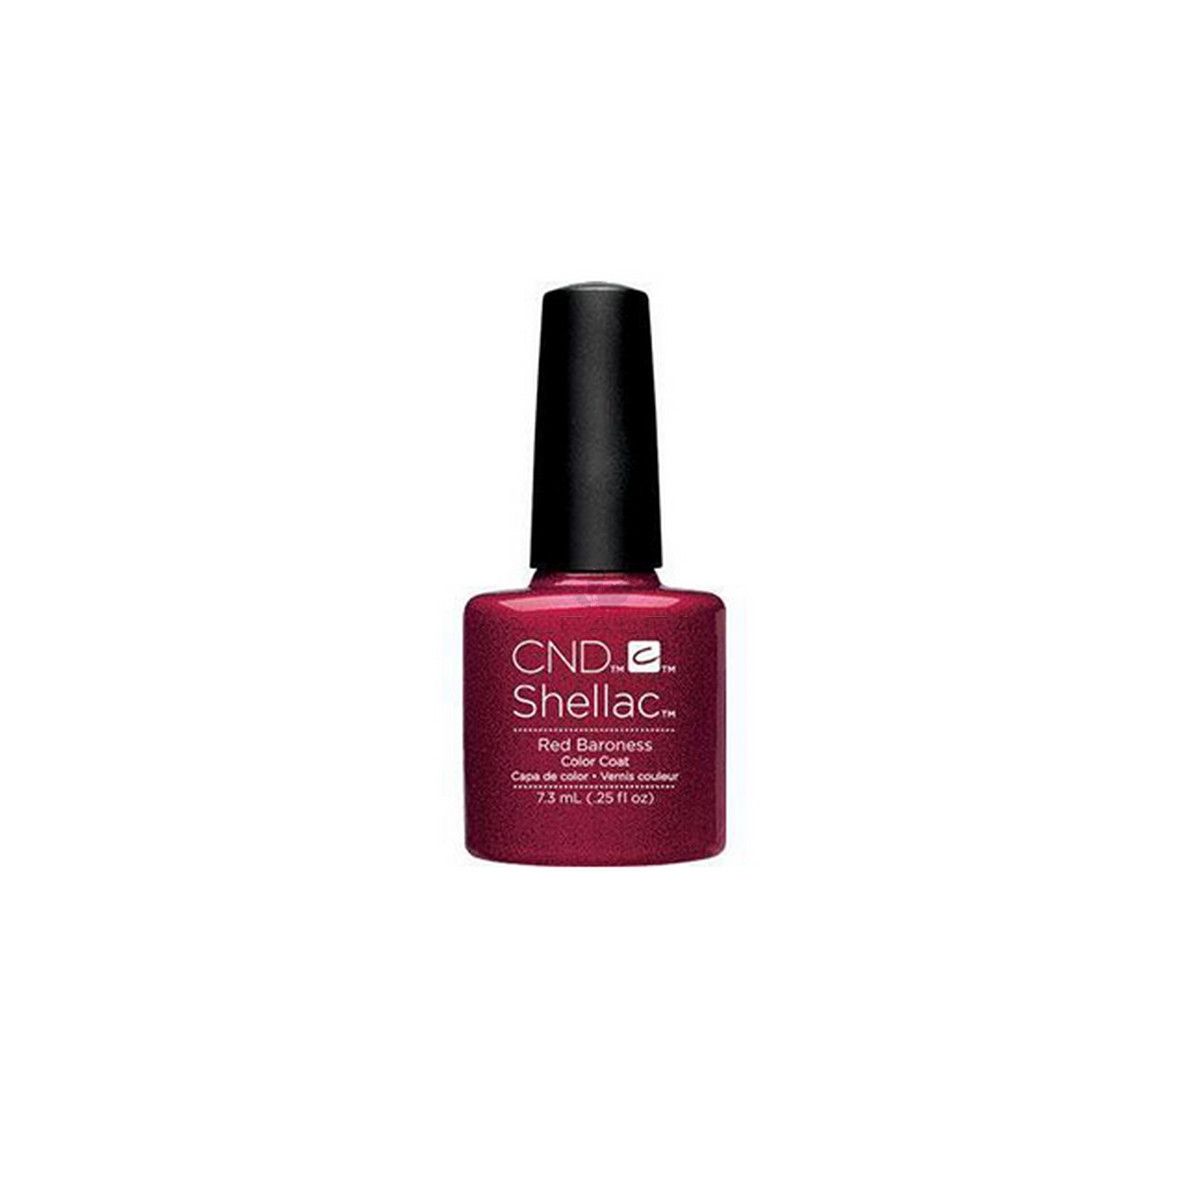 CND Shellac #139 Red Baroness .25 oz